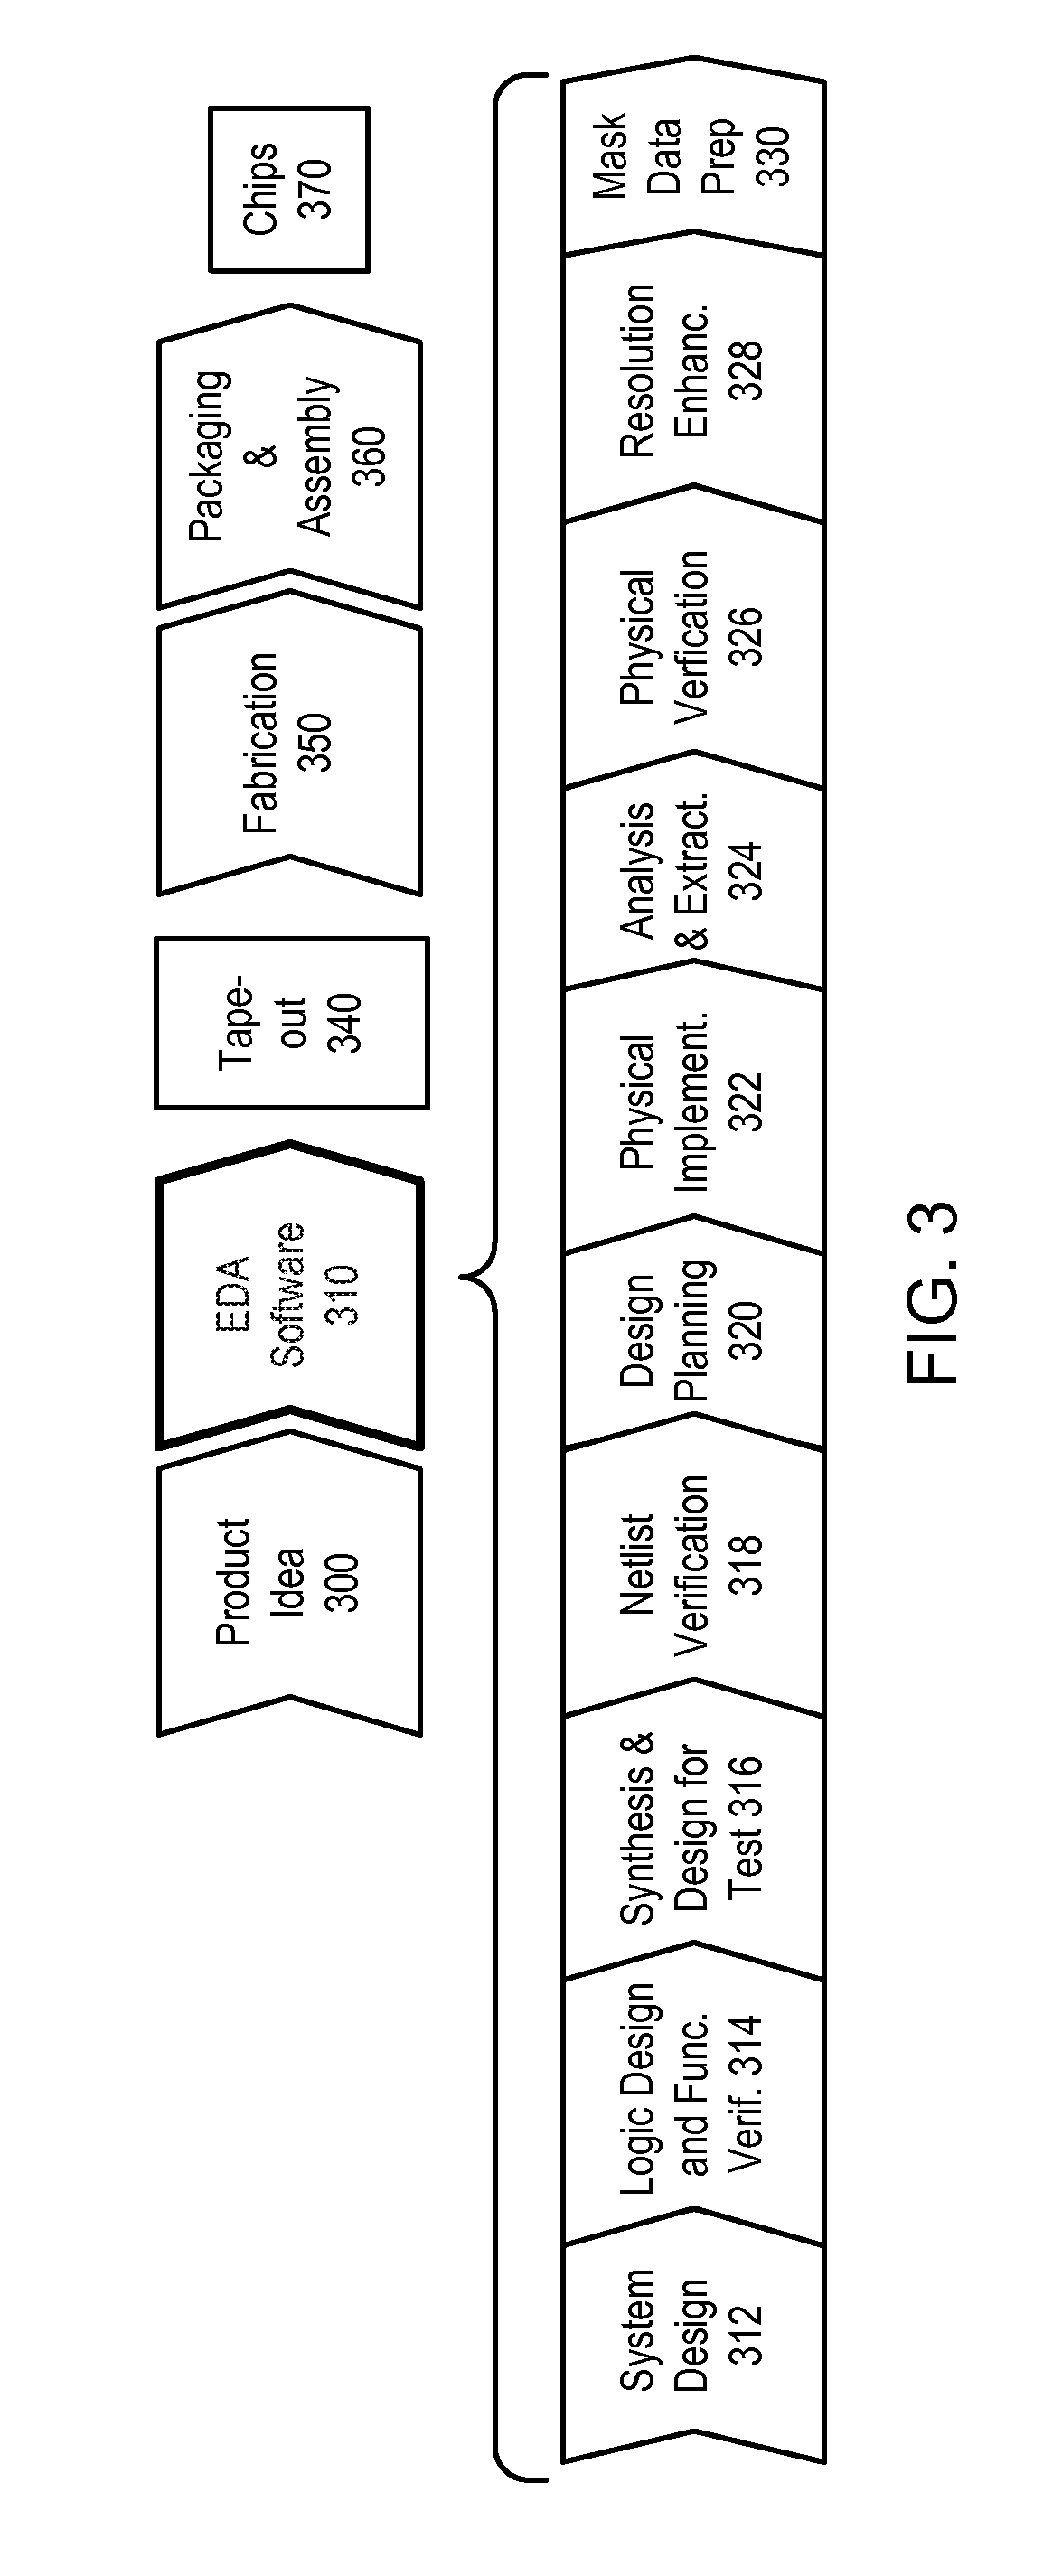 Method and apparatus for generating a layout for a transistor